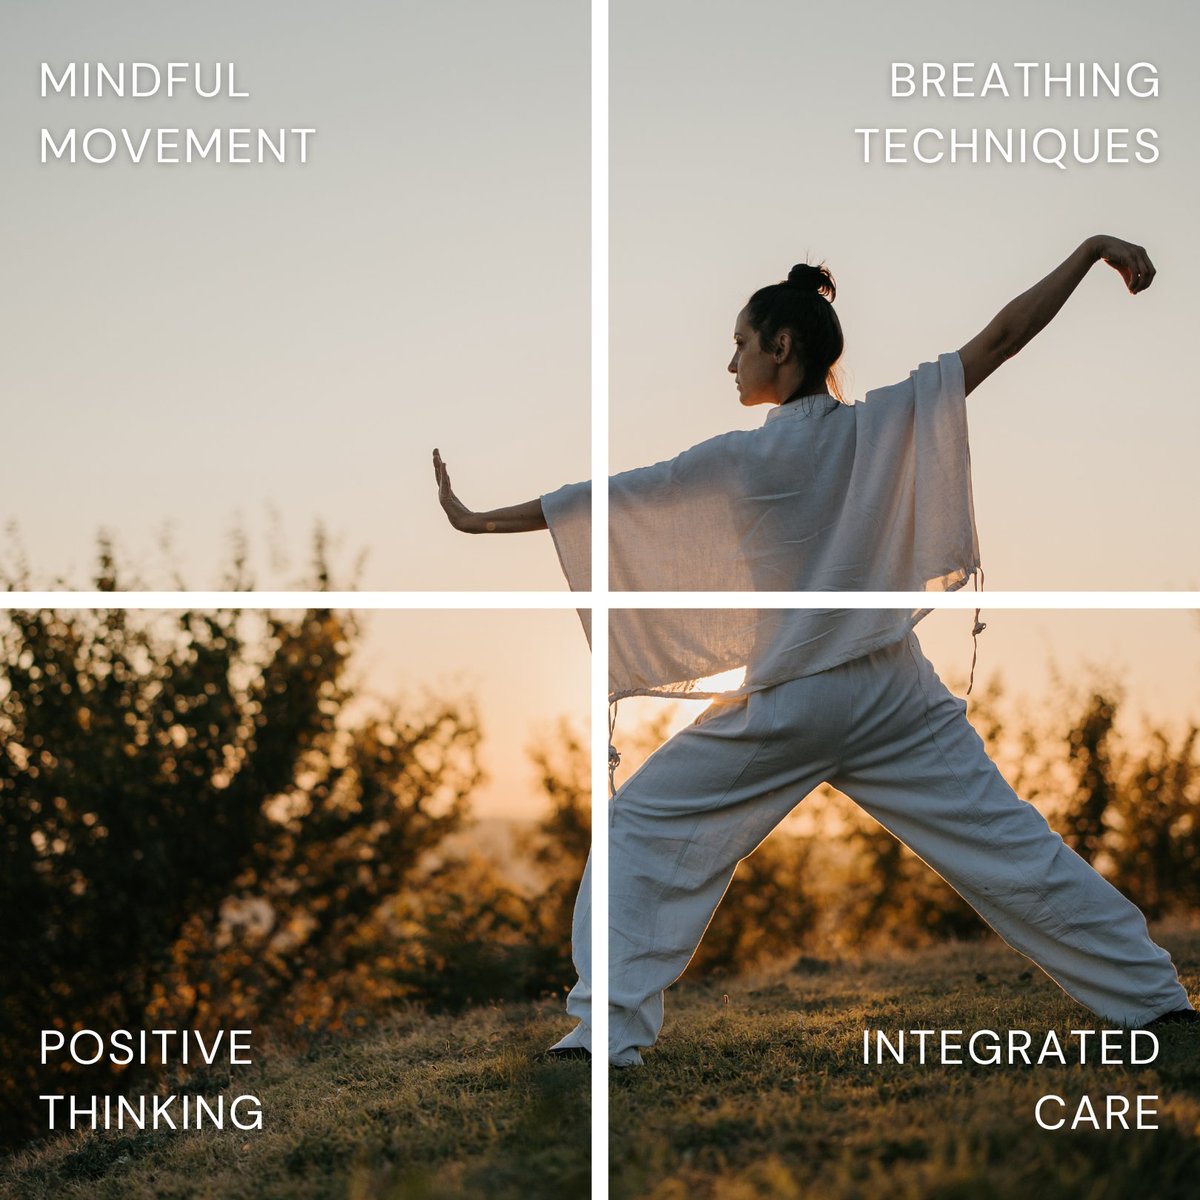 The mind-body connection is real! Integrating mental health with physical therapy can transform your wellness journey. Tips: Practice mindful movement, Breathe deeply, Stay positive. Your mind and body are powerful allies. #MindBodyWellness #HolisticCare